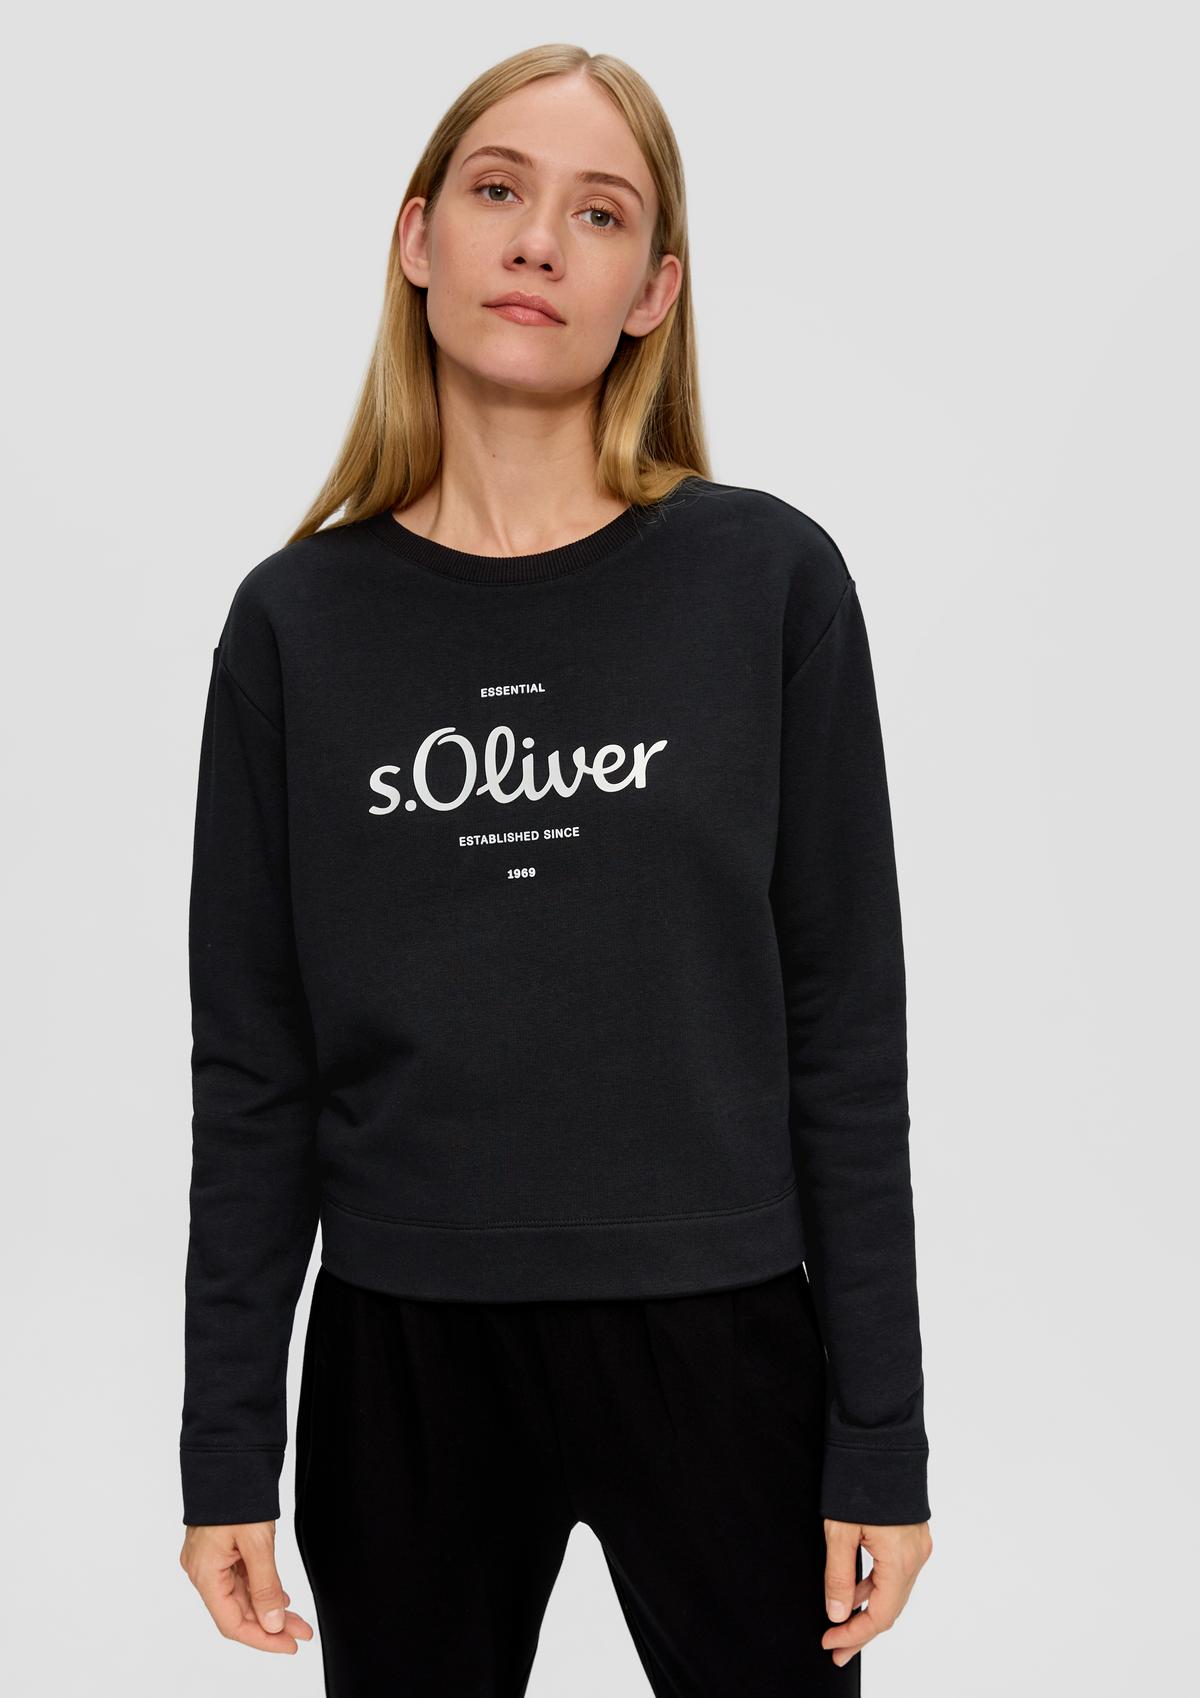 s.Oliver Sweatshirt made of stretch cotton